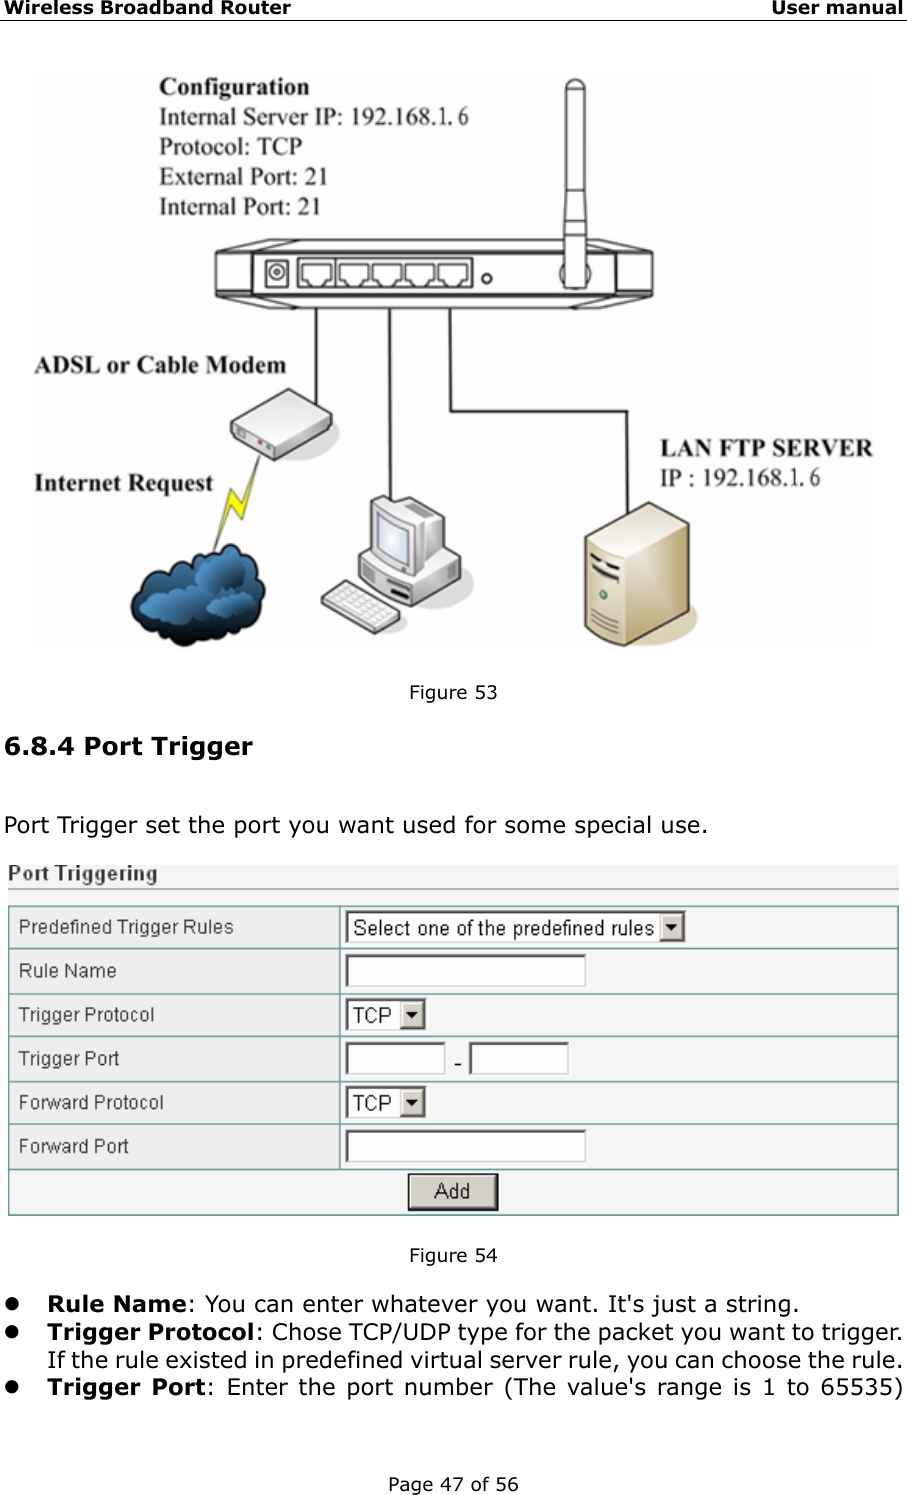 Wireless Broadband Router                                                   User manual Page 47 of 56   Figure 53   6.8.4 Port Trigger Port Trigger set the port you want used for some special use.    Figure 54  z Rule Name: You can enter whatever you want. It&apos;s just a string. z Trigger Protocol: Chose TCP/UDP type for the packet you want to trigger.   If the rule existed in predefined virtual server rule, you can choose the rule. z Trigger Port: Enter the port number (The value&apos;s range is 1 to 65535) 